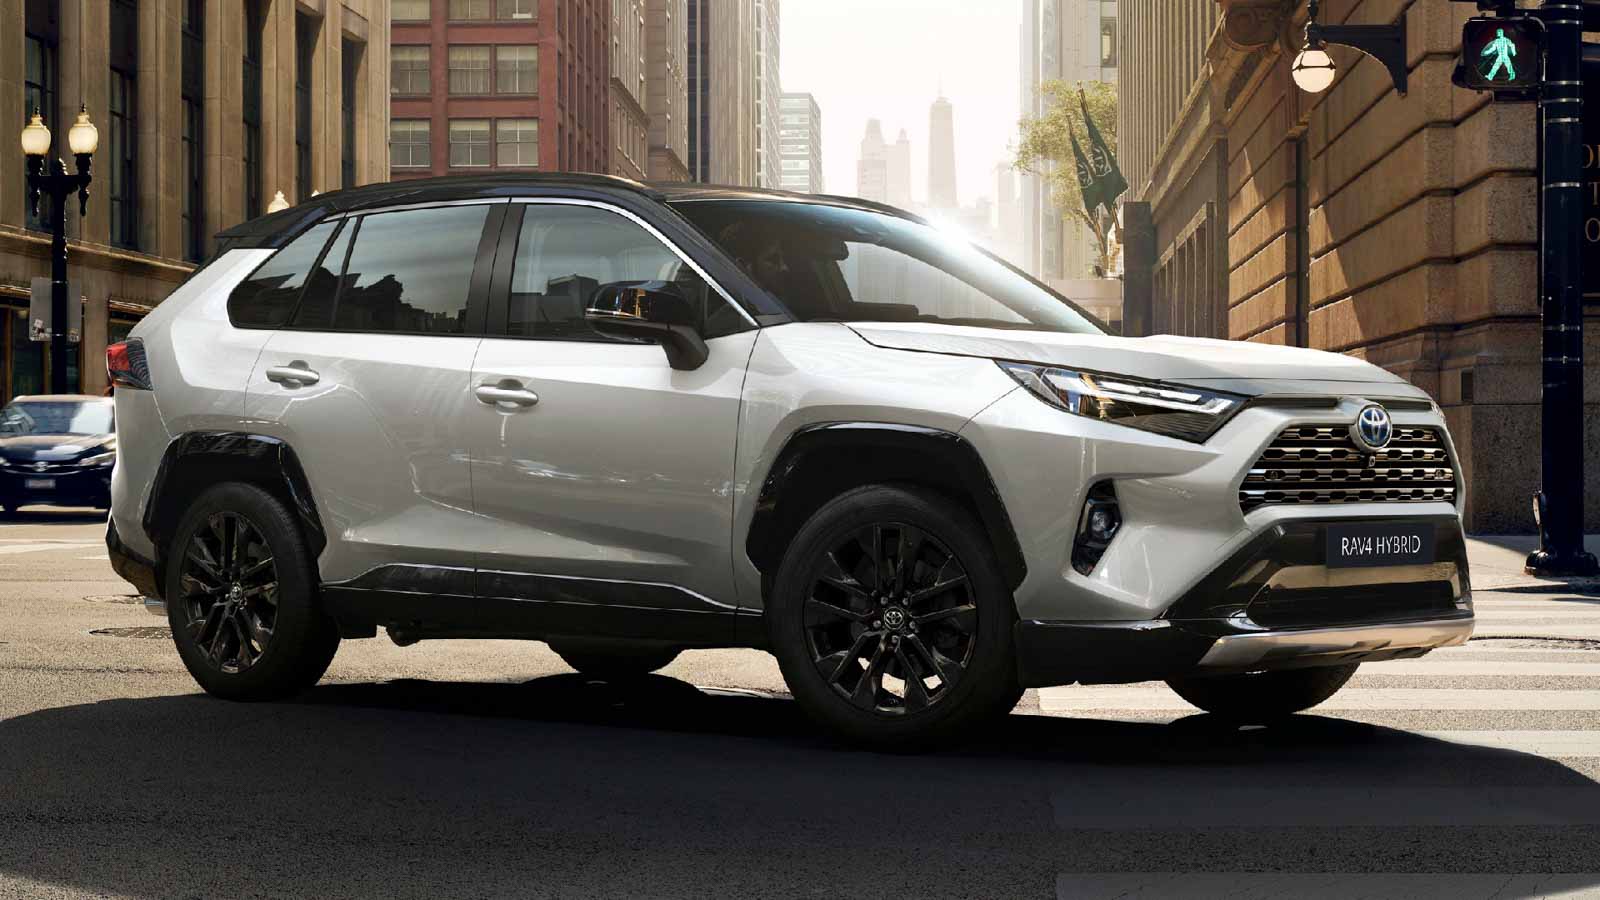 2023 Toyota RAV4 Revealed With Huge Updates More Appealing Now